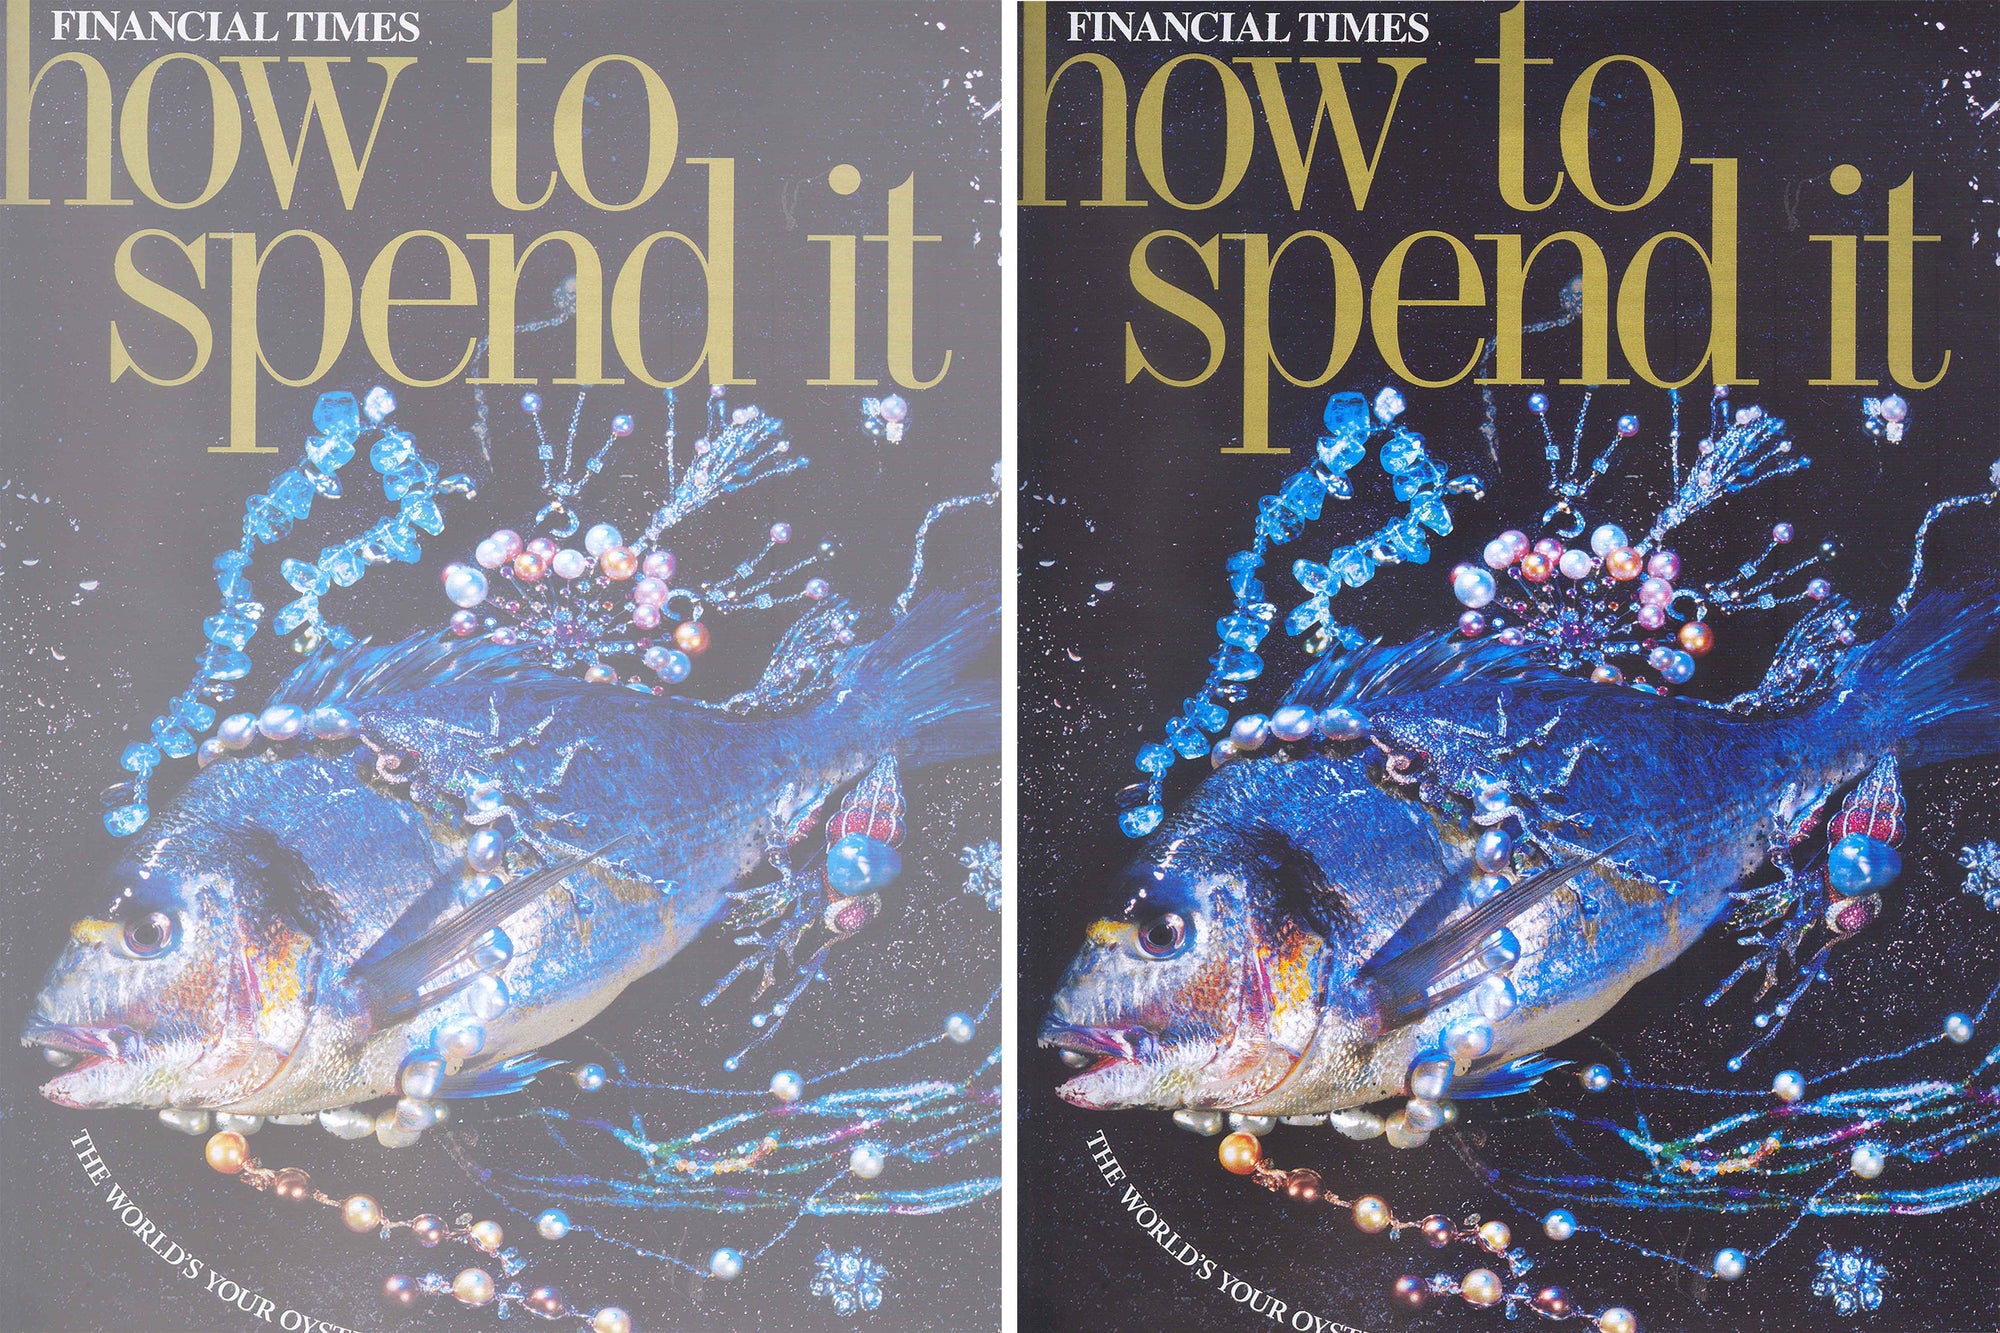 FT - How To Spend It